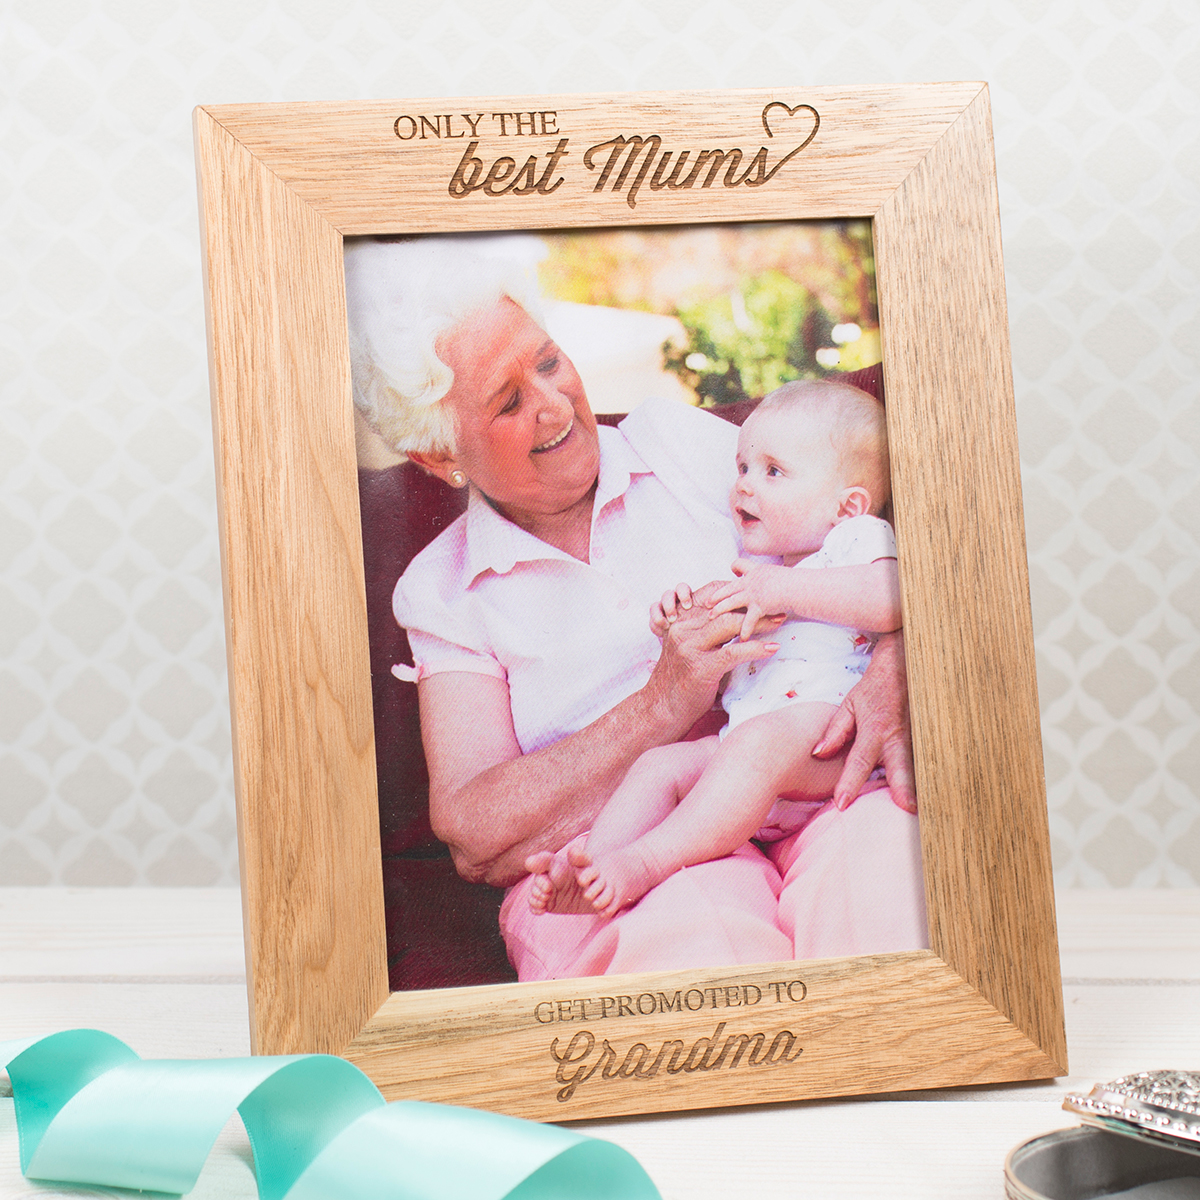 Personalised Engraved Wooden Photo Frame - Only The Best Mums